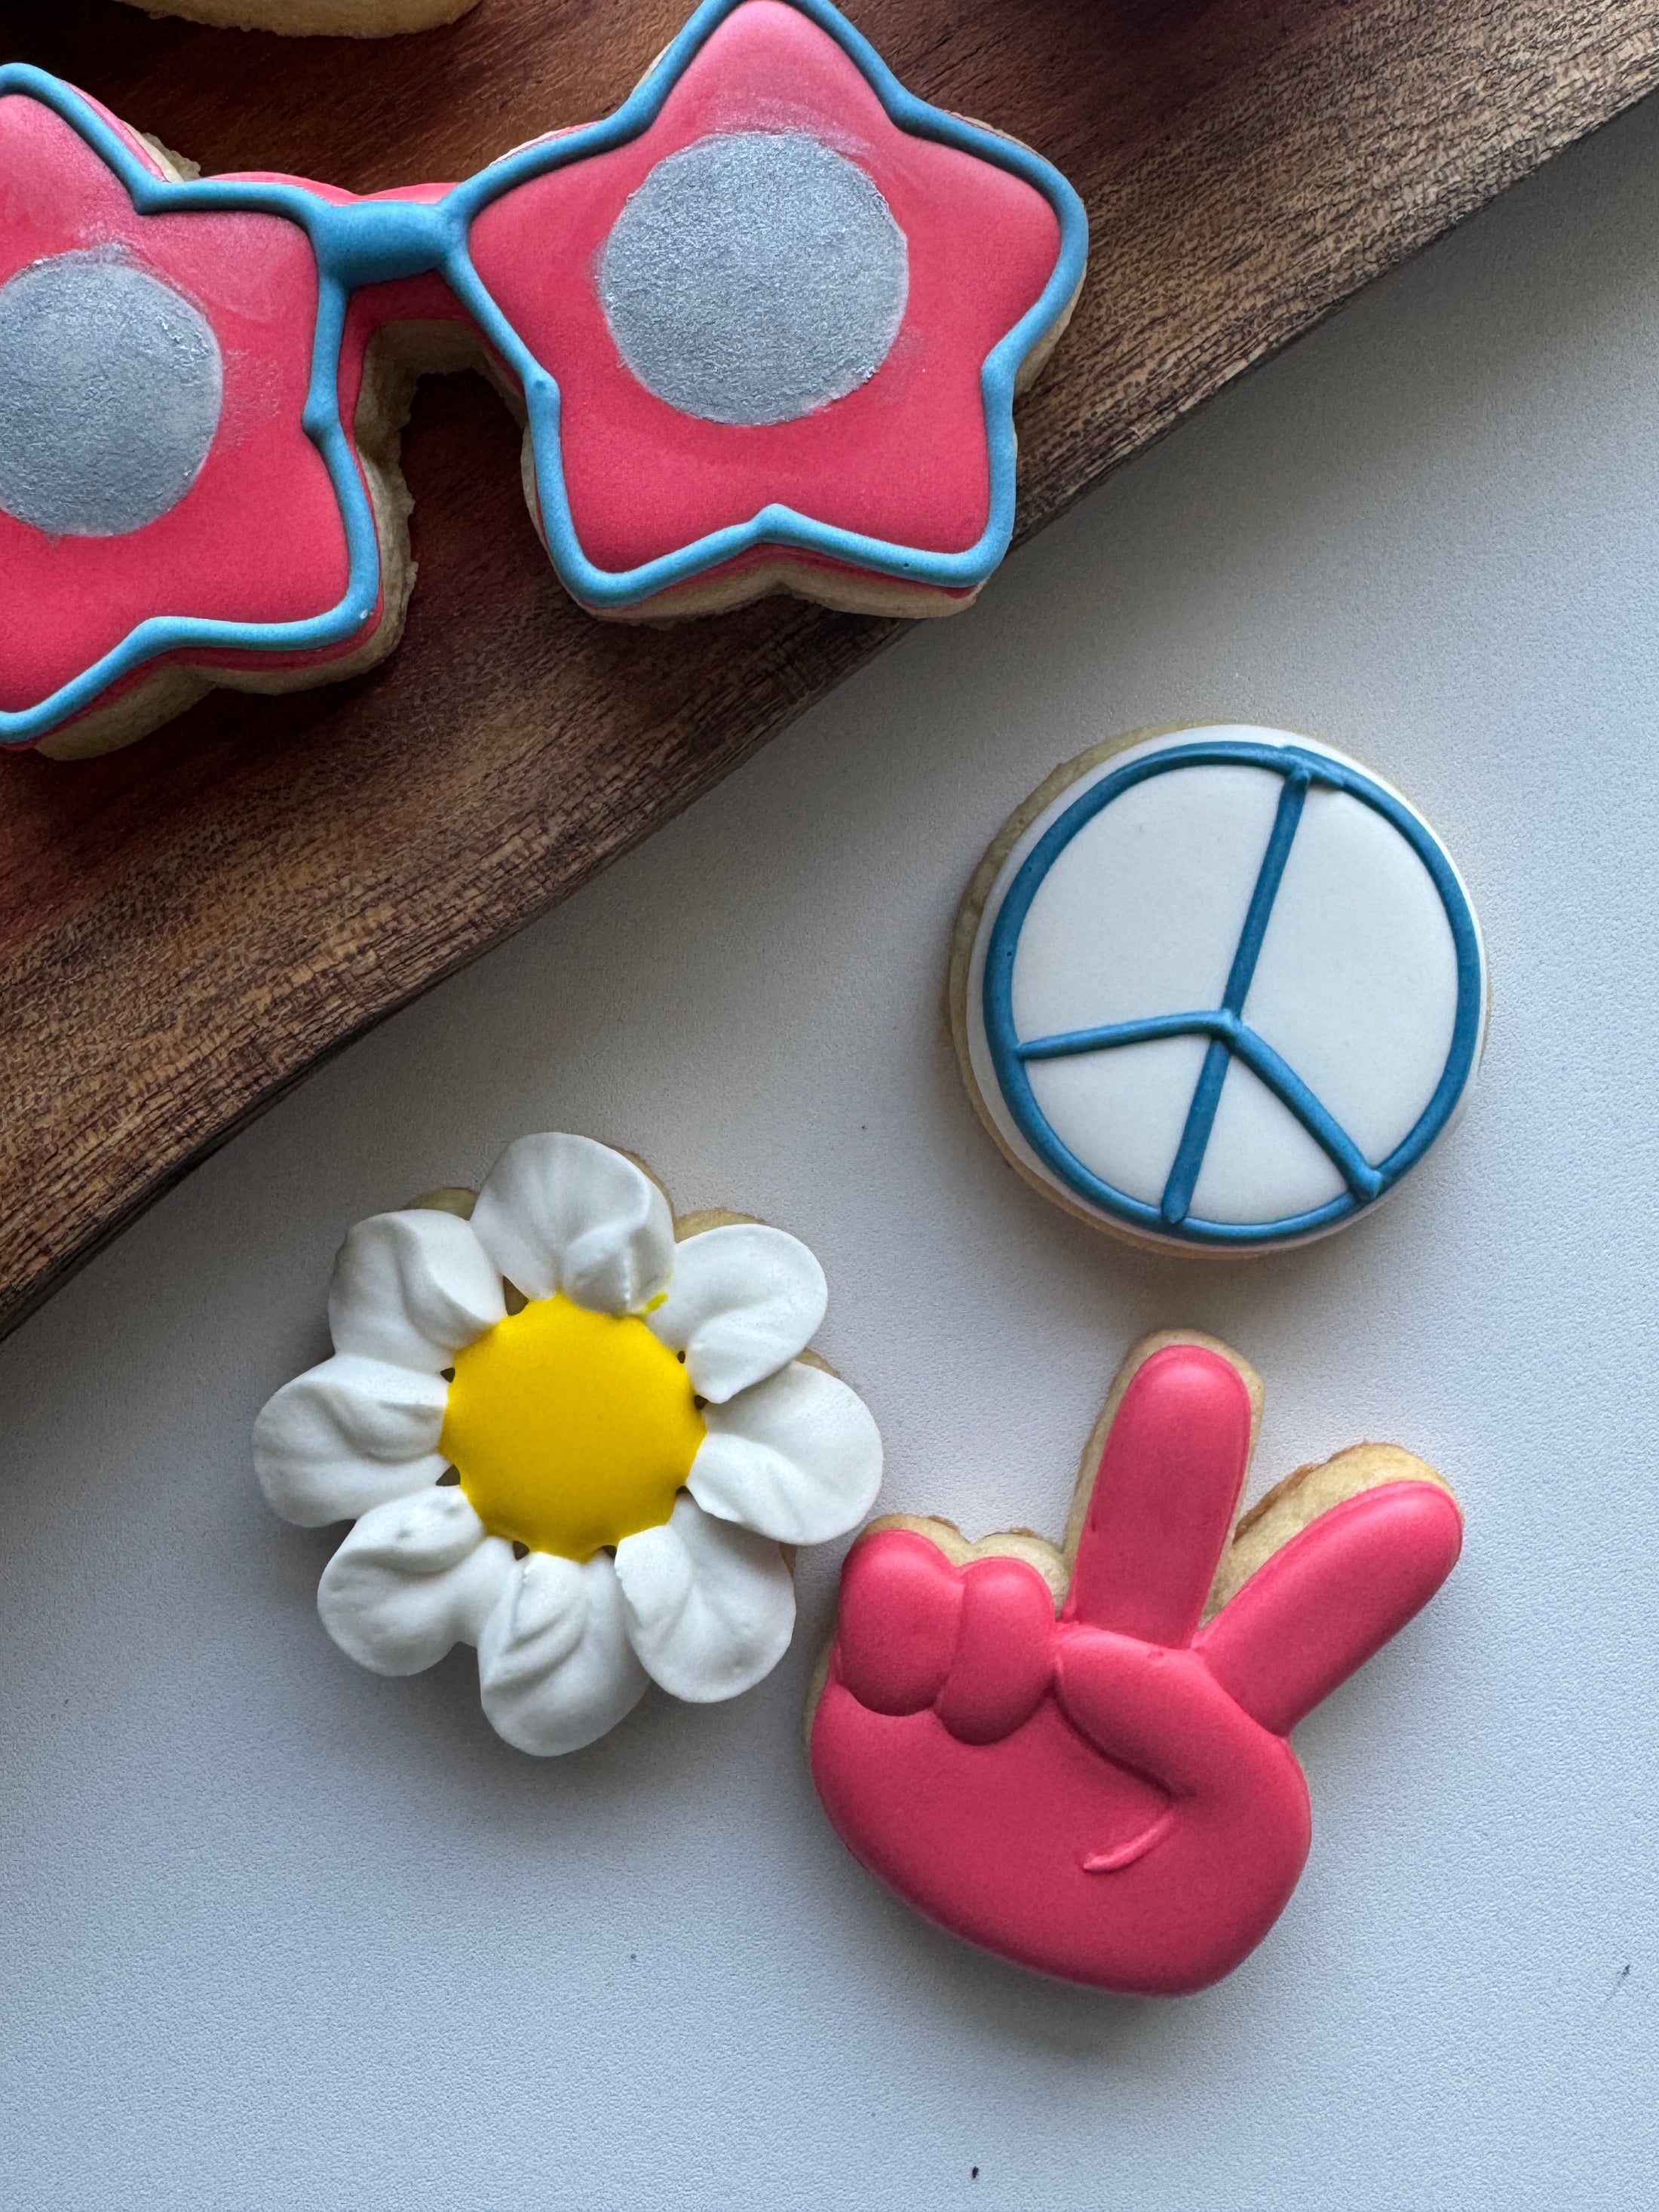 The Cheerful Box Cookie Decorating Kit